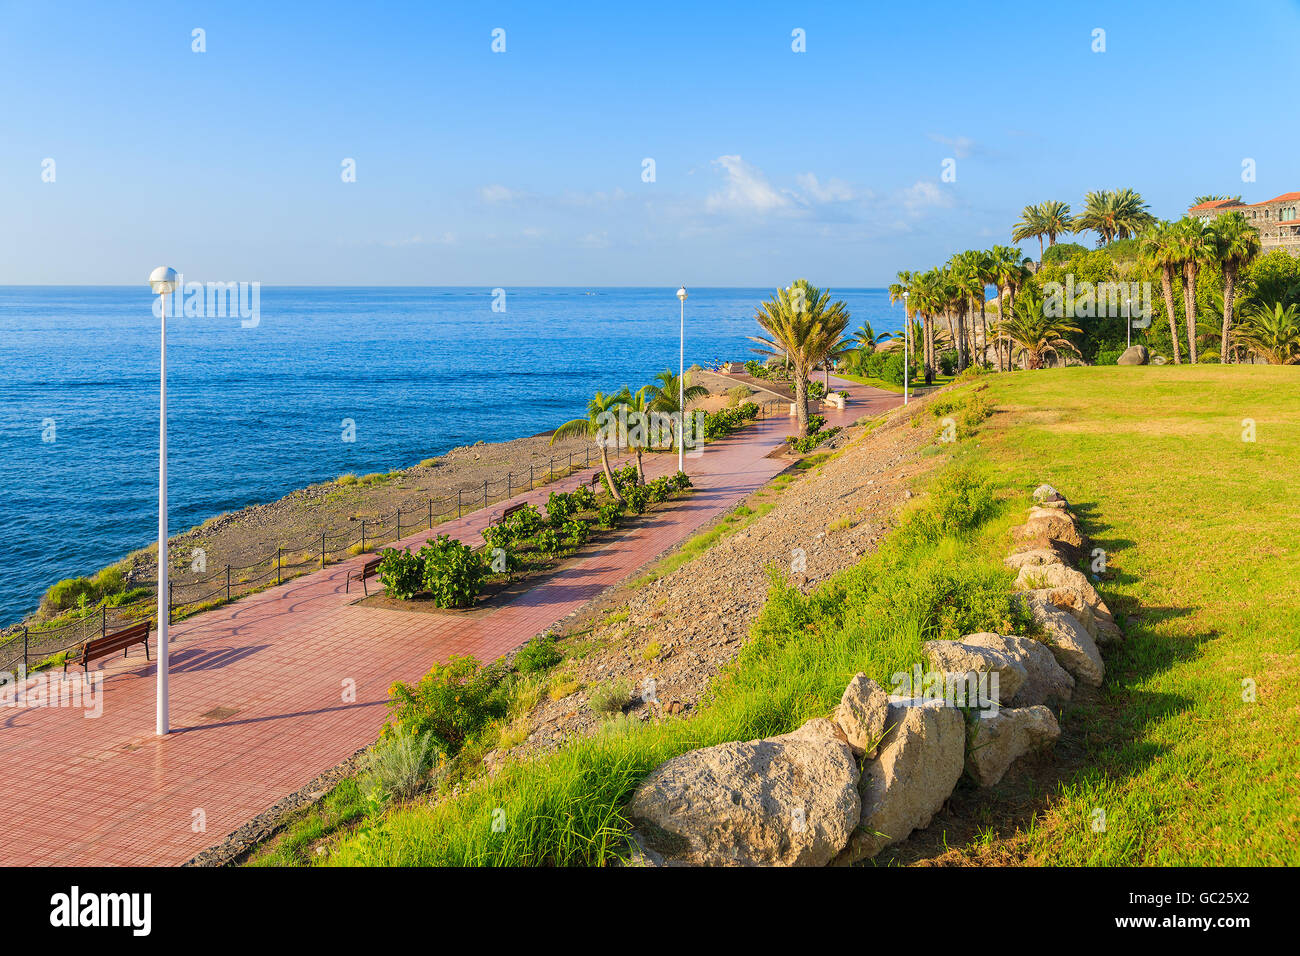 Exotic coastal promenade with palm trees in Costa Adeje holiday town, Tenerife, Canary Islands, Spain Stock Photo